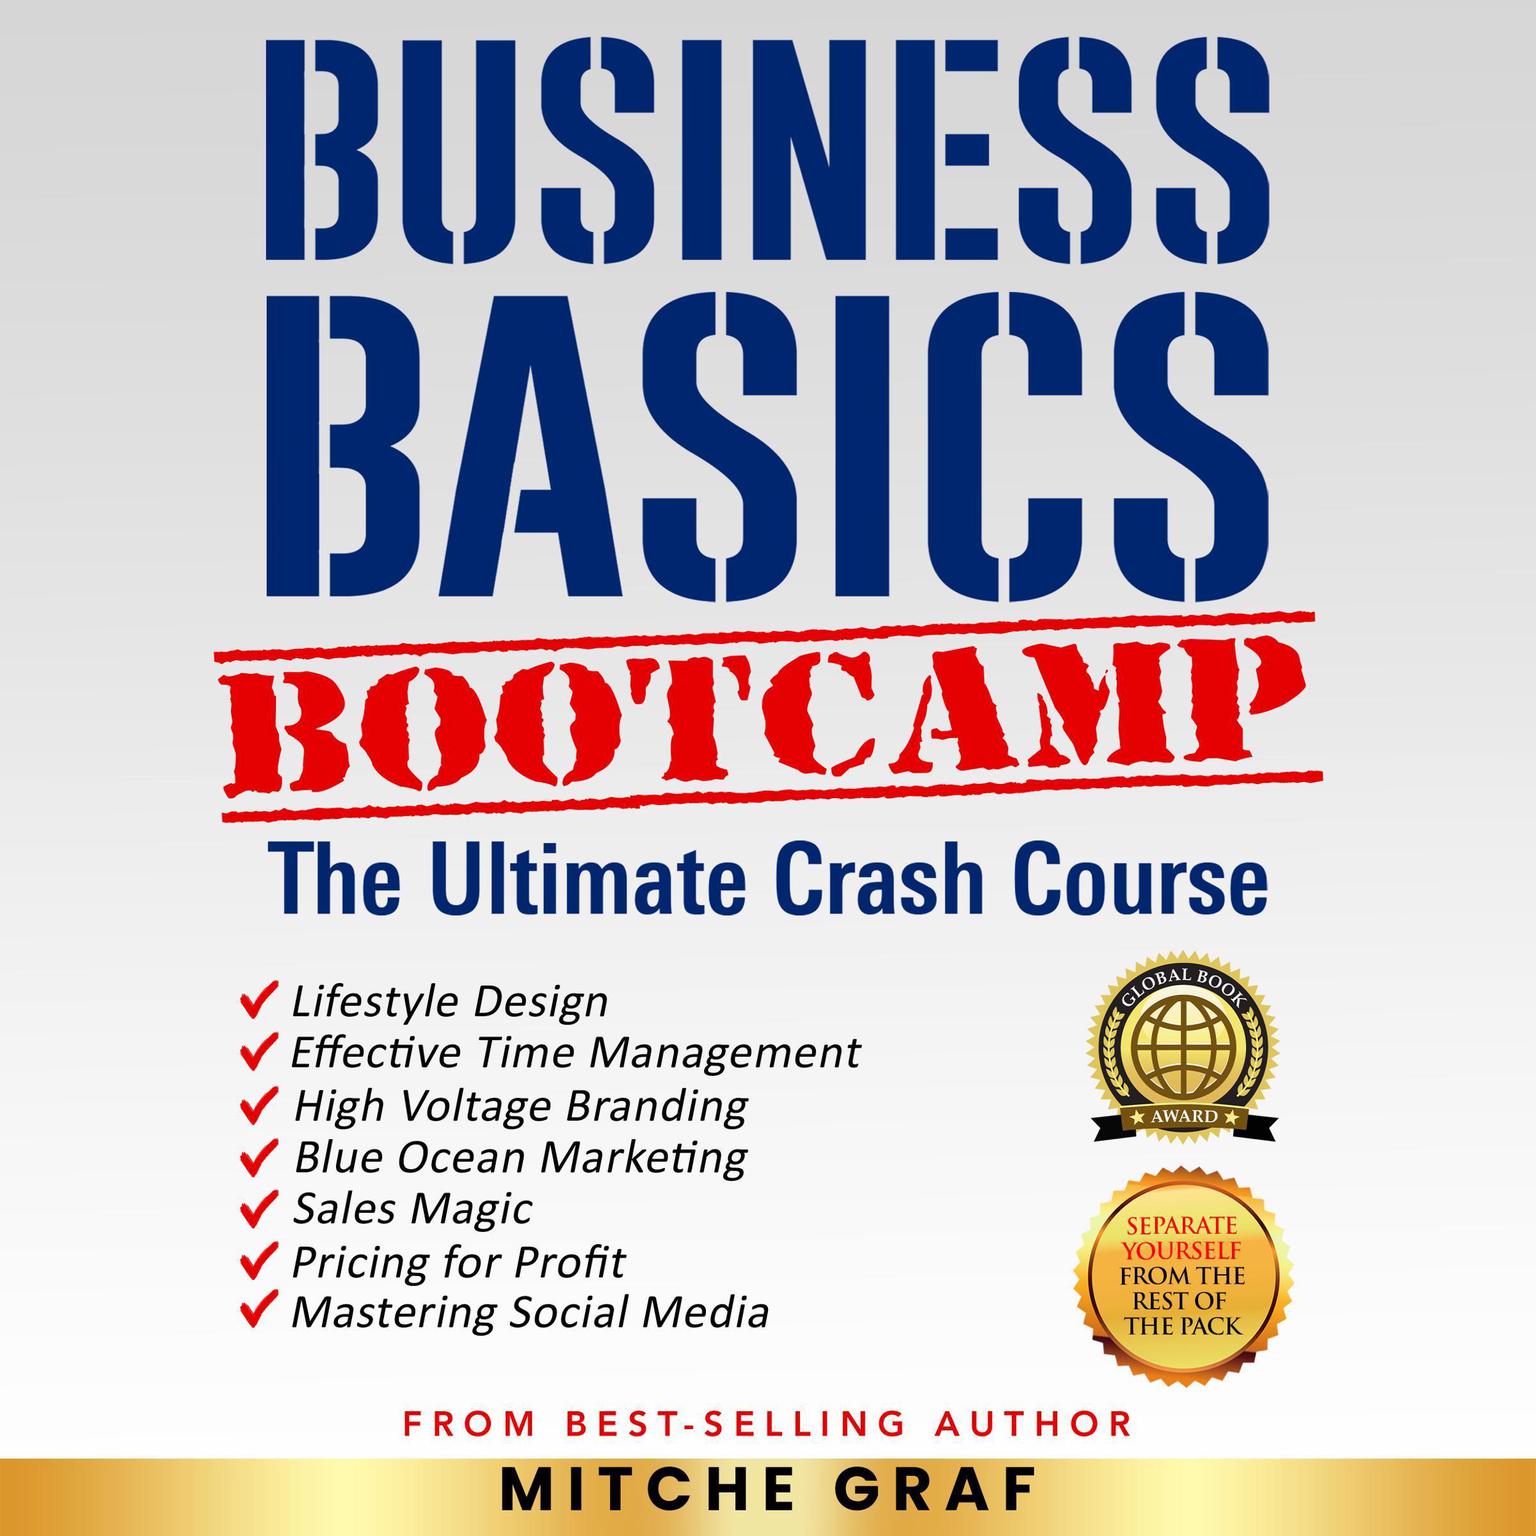 The Business Basics BootCamp: The Ultimate Crash Course Audiobook, by Mitche Graf